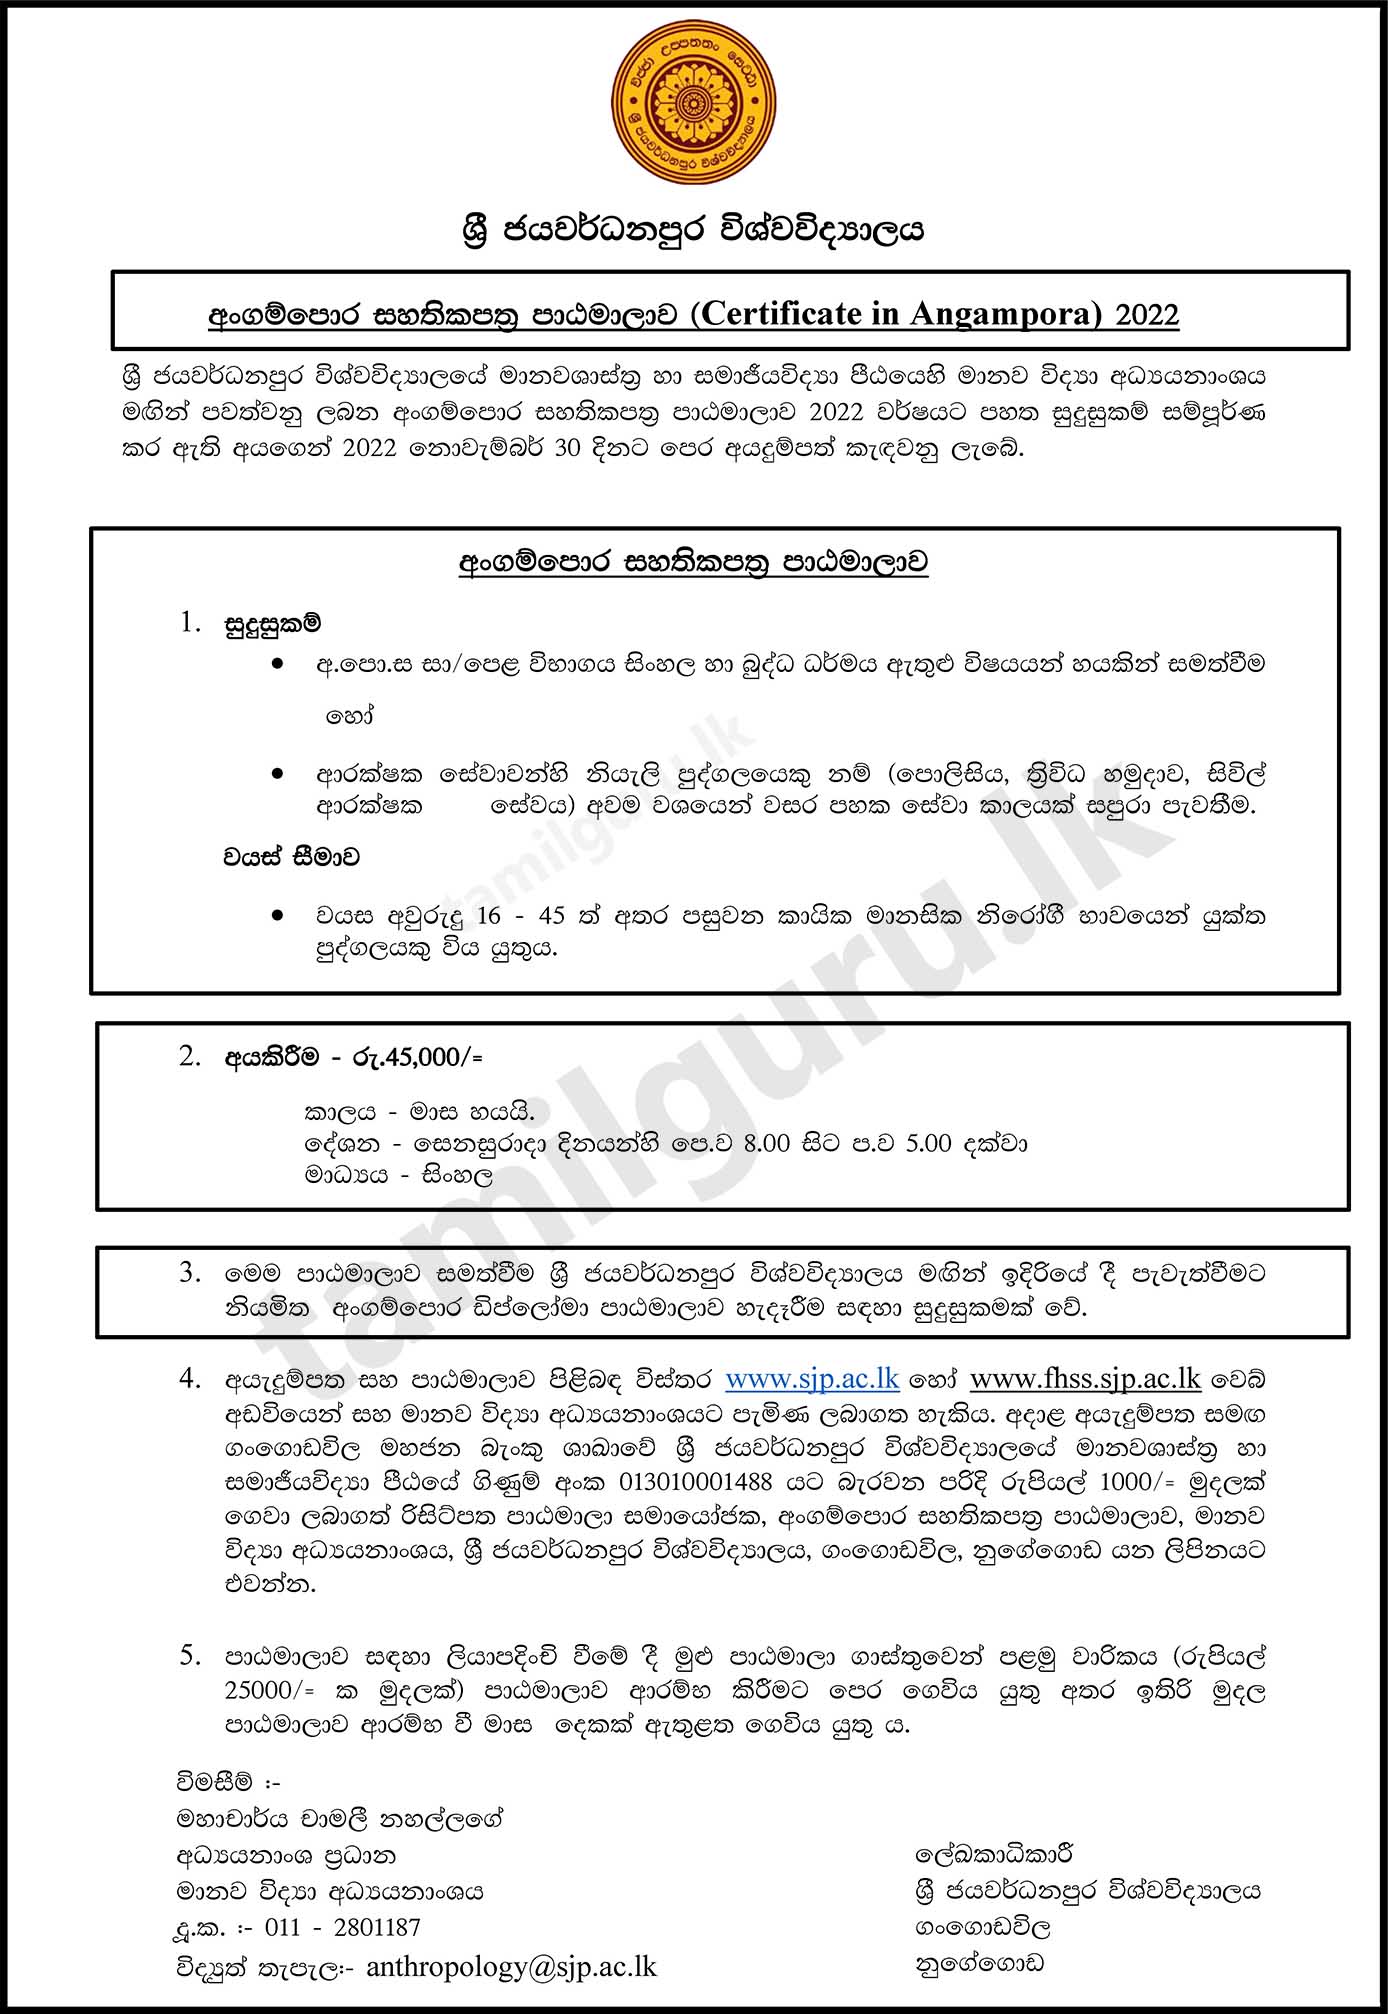 Application Notice for Certificate Course in Angampora (2022) at the University of Sri Jayewardenepura